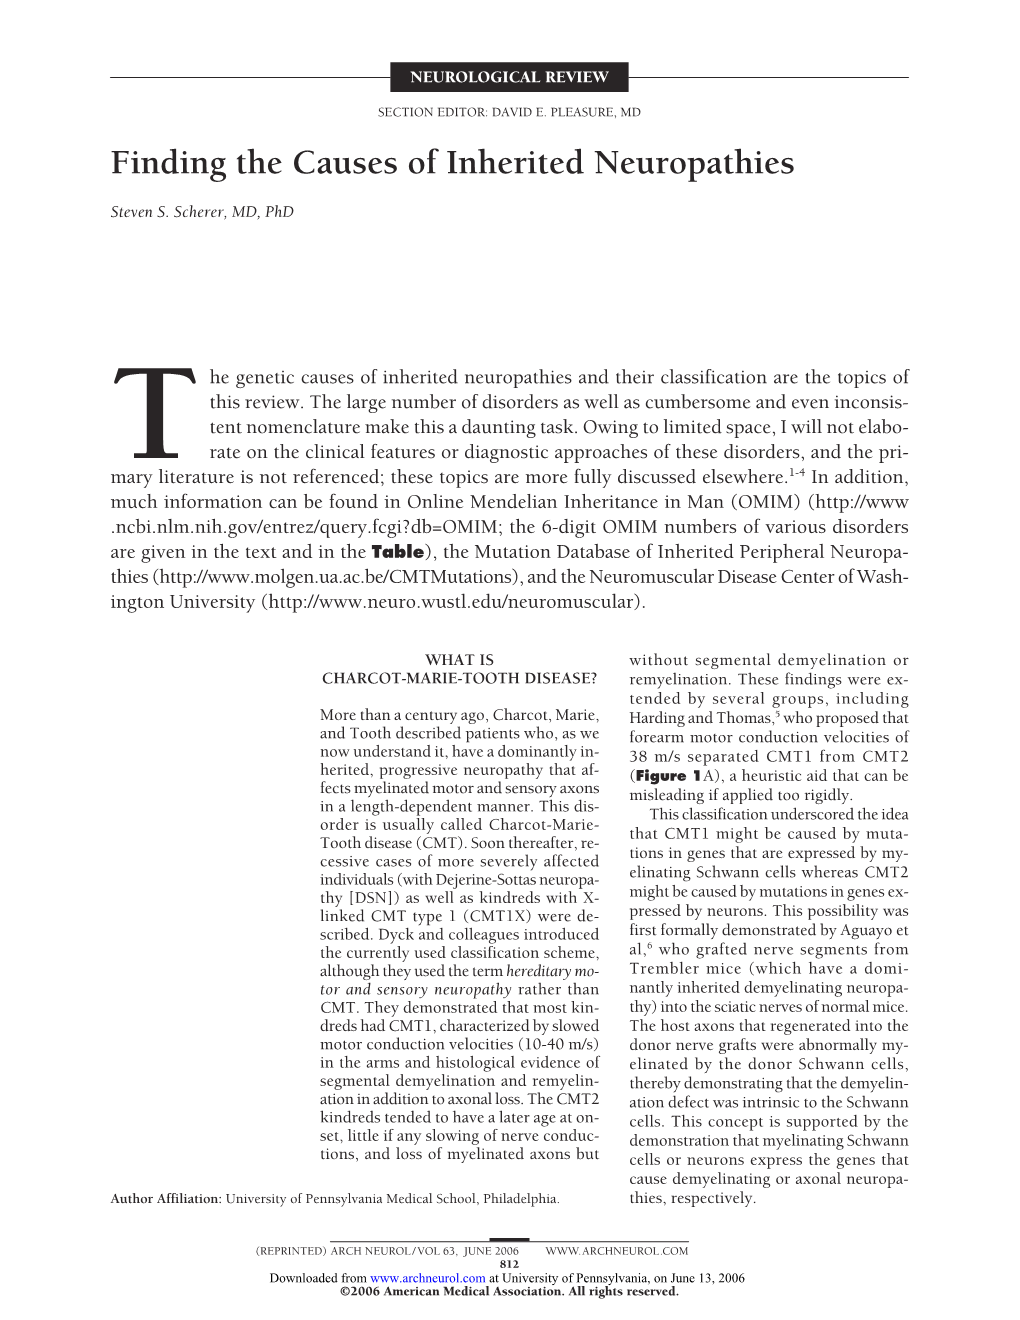 Finding the Causes of Inherited Neuropathies